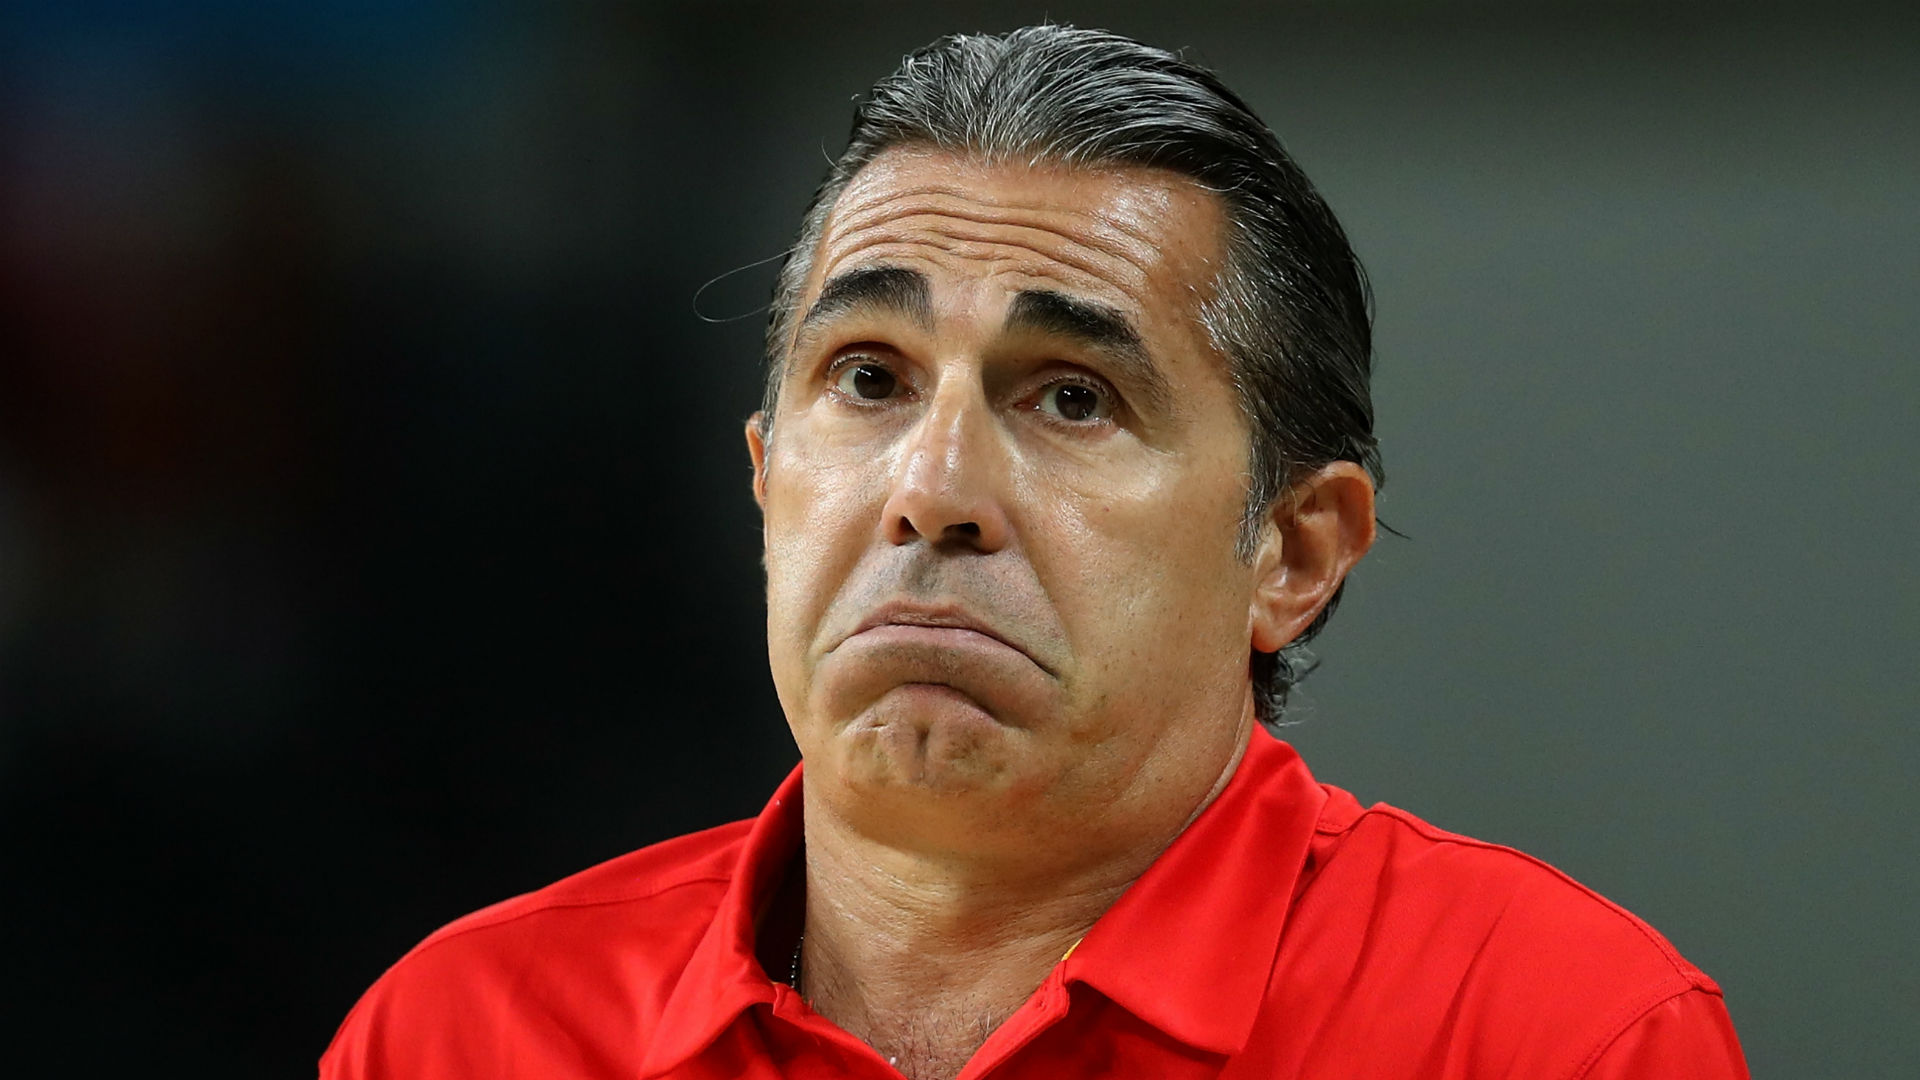 Scariolo preparing Spain for 'demanding' FIBA Basketball World Cup qualifying campaign